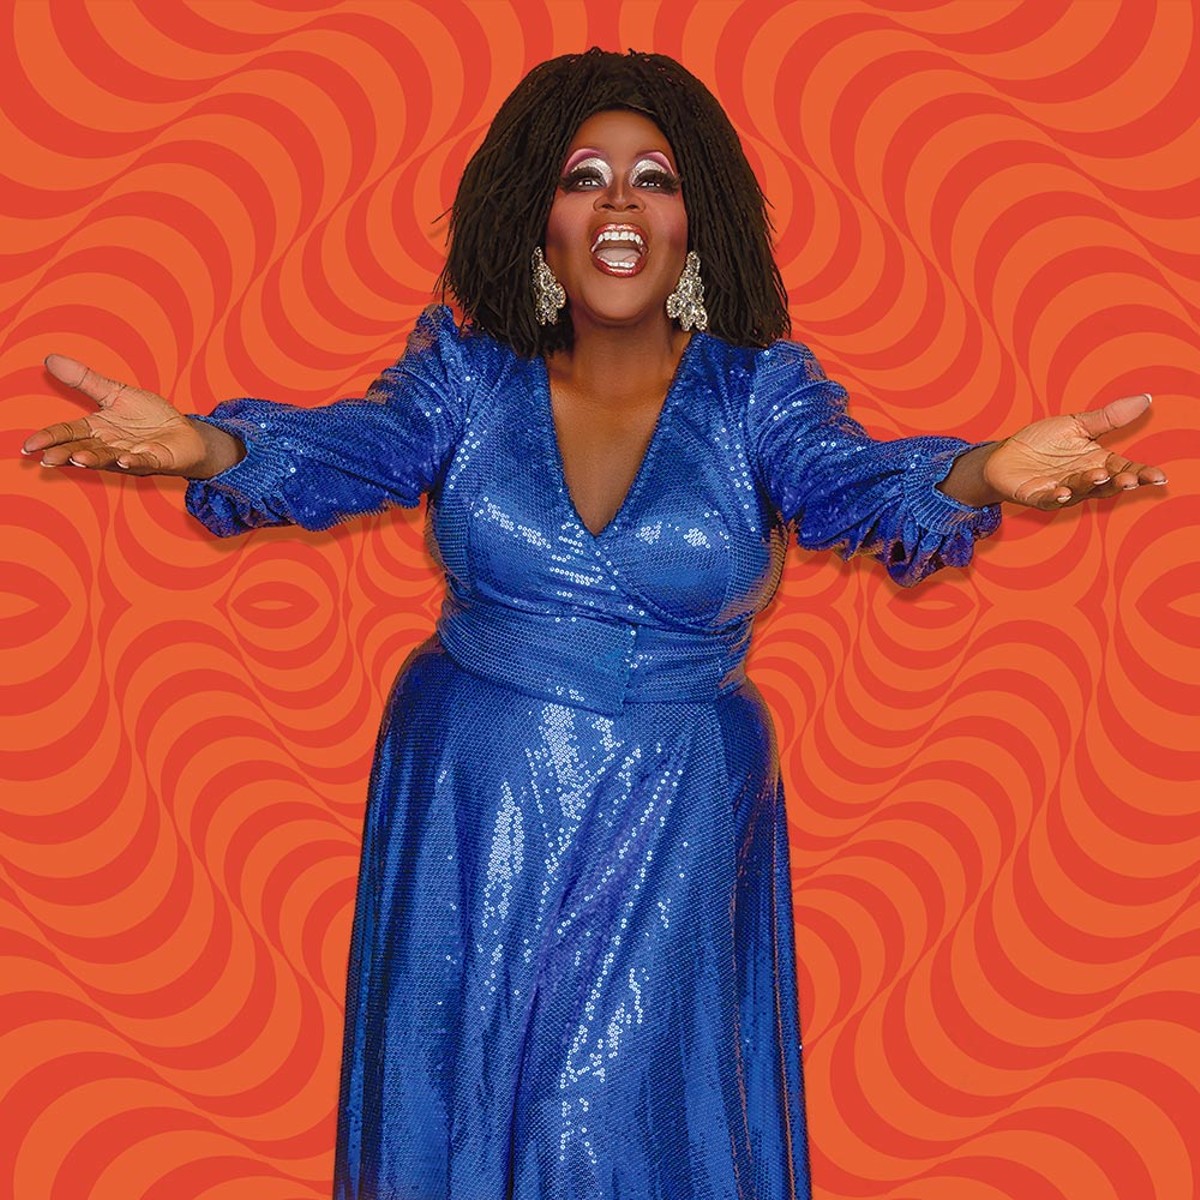 Best RuPaul Drag Photos: Early Days, 'Drag Race' and Everything Else